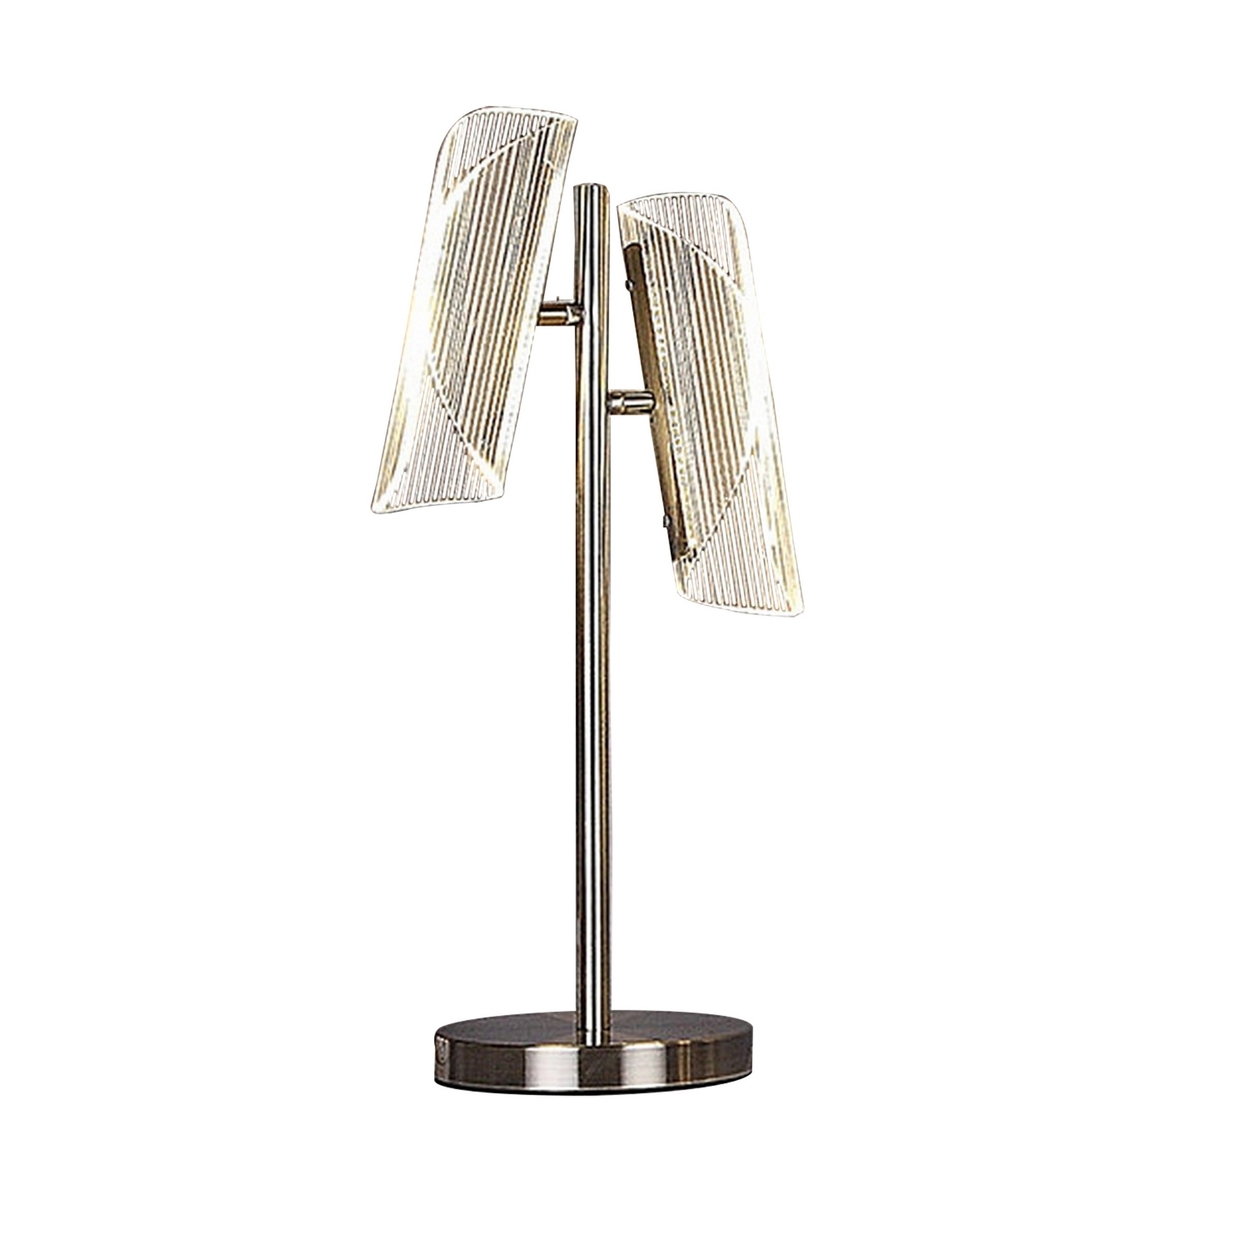 Spark 23 Inch Table Lamp With Metal Base And 2 Geometric Shades, Gold -Saltoro Sherpi